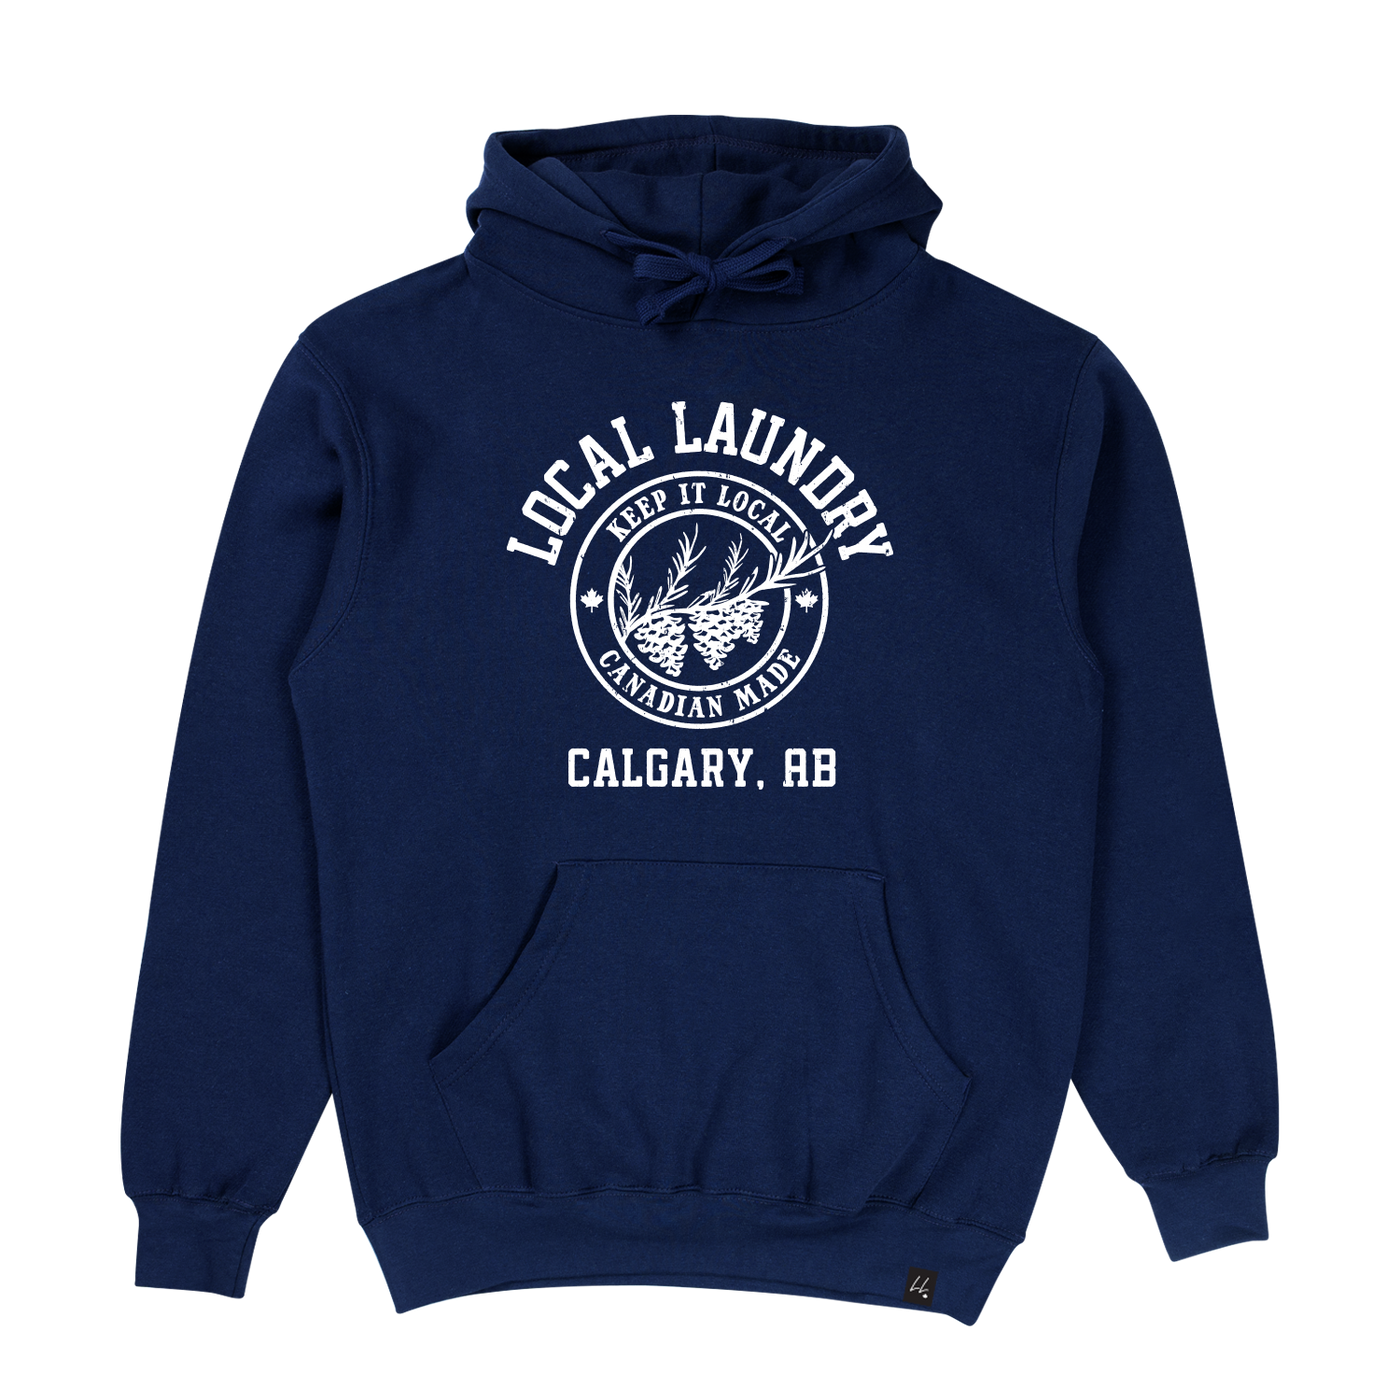 The Local Laundry Varsity hoodie in navy blue featuring a white graphic on the front torso. The graphic features a crest with three pine cones and "Keep it Local" on the top and "Canadian Made" on the bottom. This garment is sustainably made in Canada, utilizing a premium blend of 50/50 cotton and polyester.